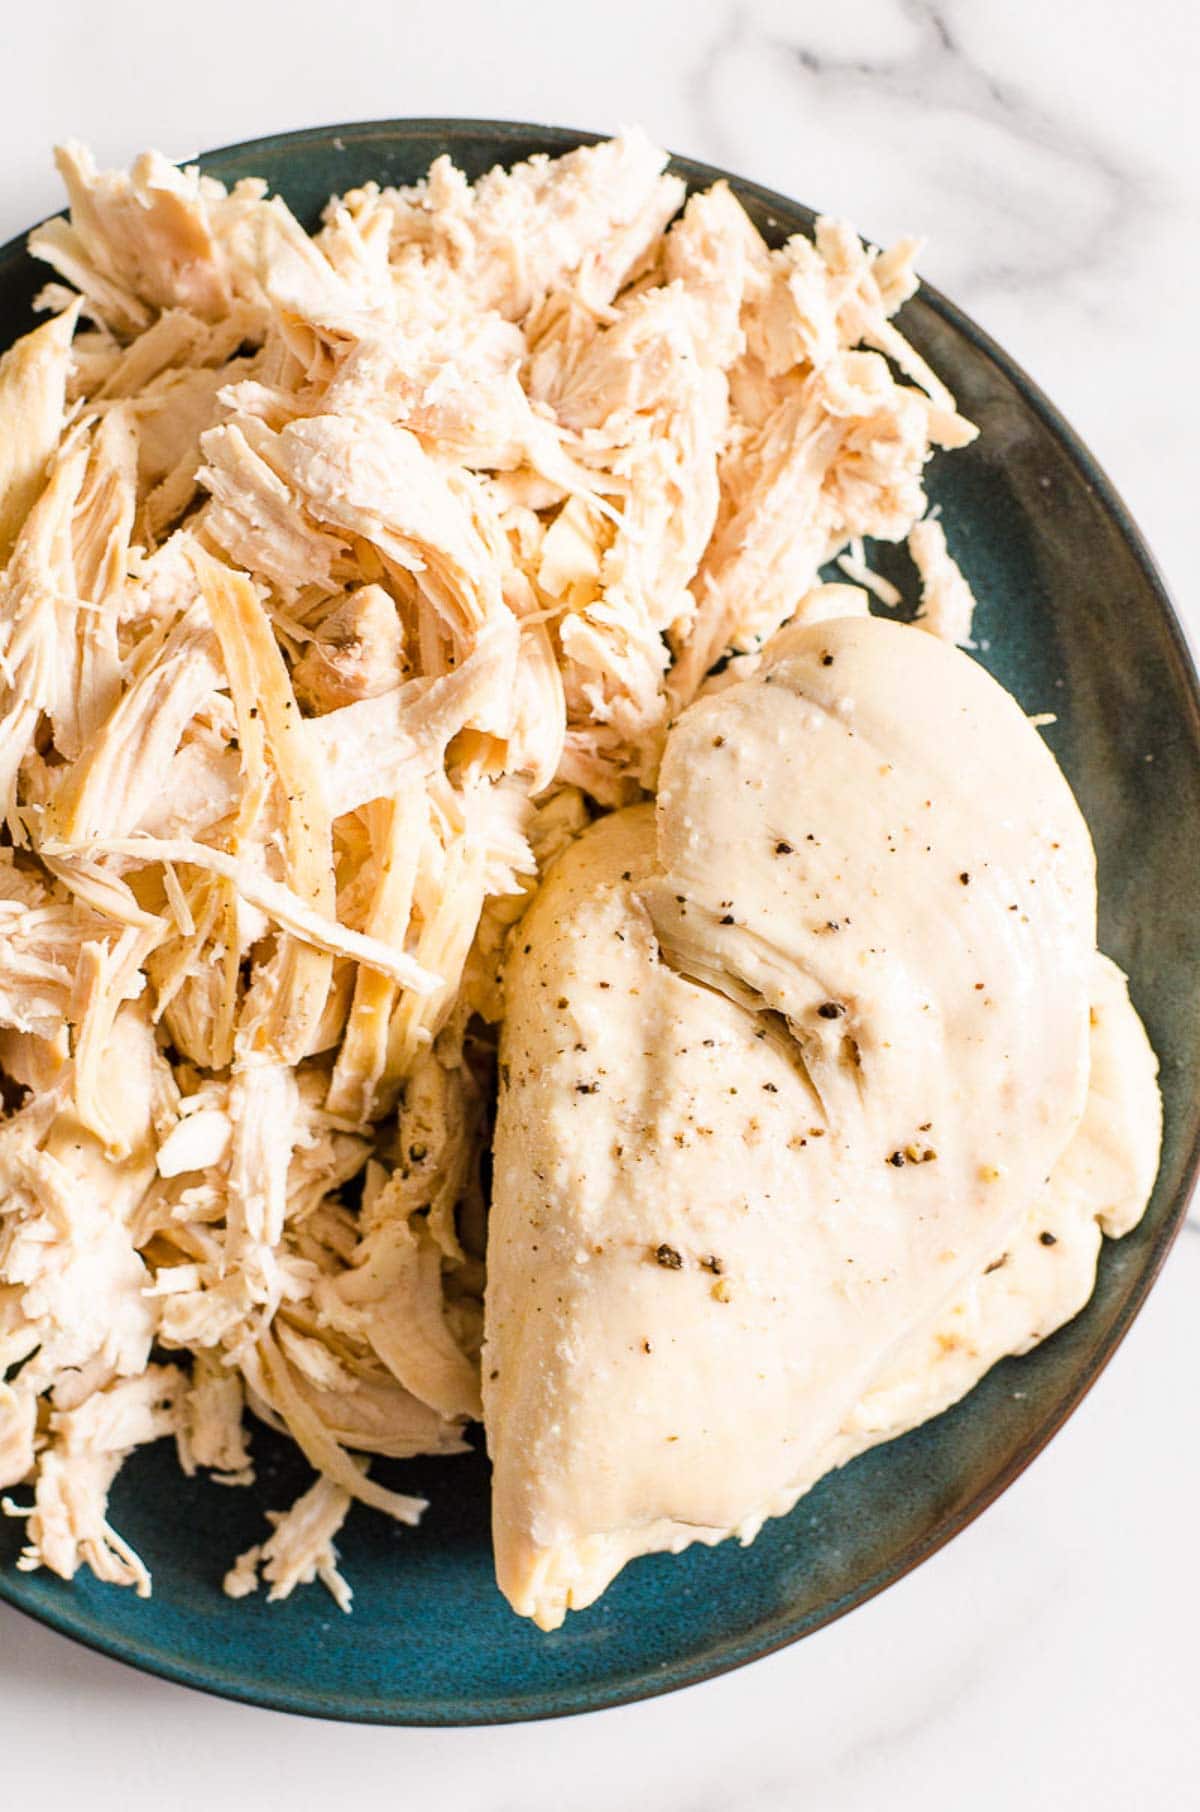 Instant Pot chicken breast and shredded chicken on a plate.